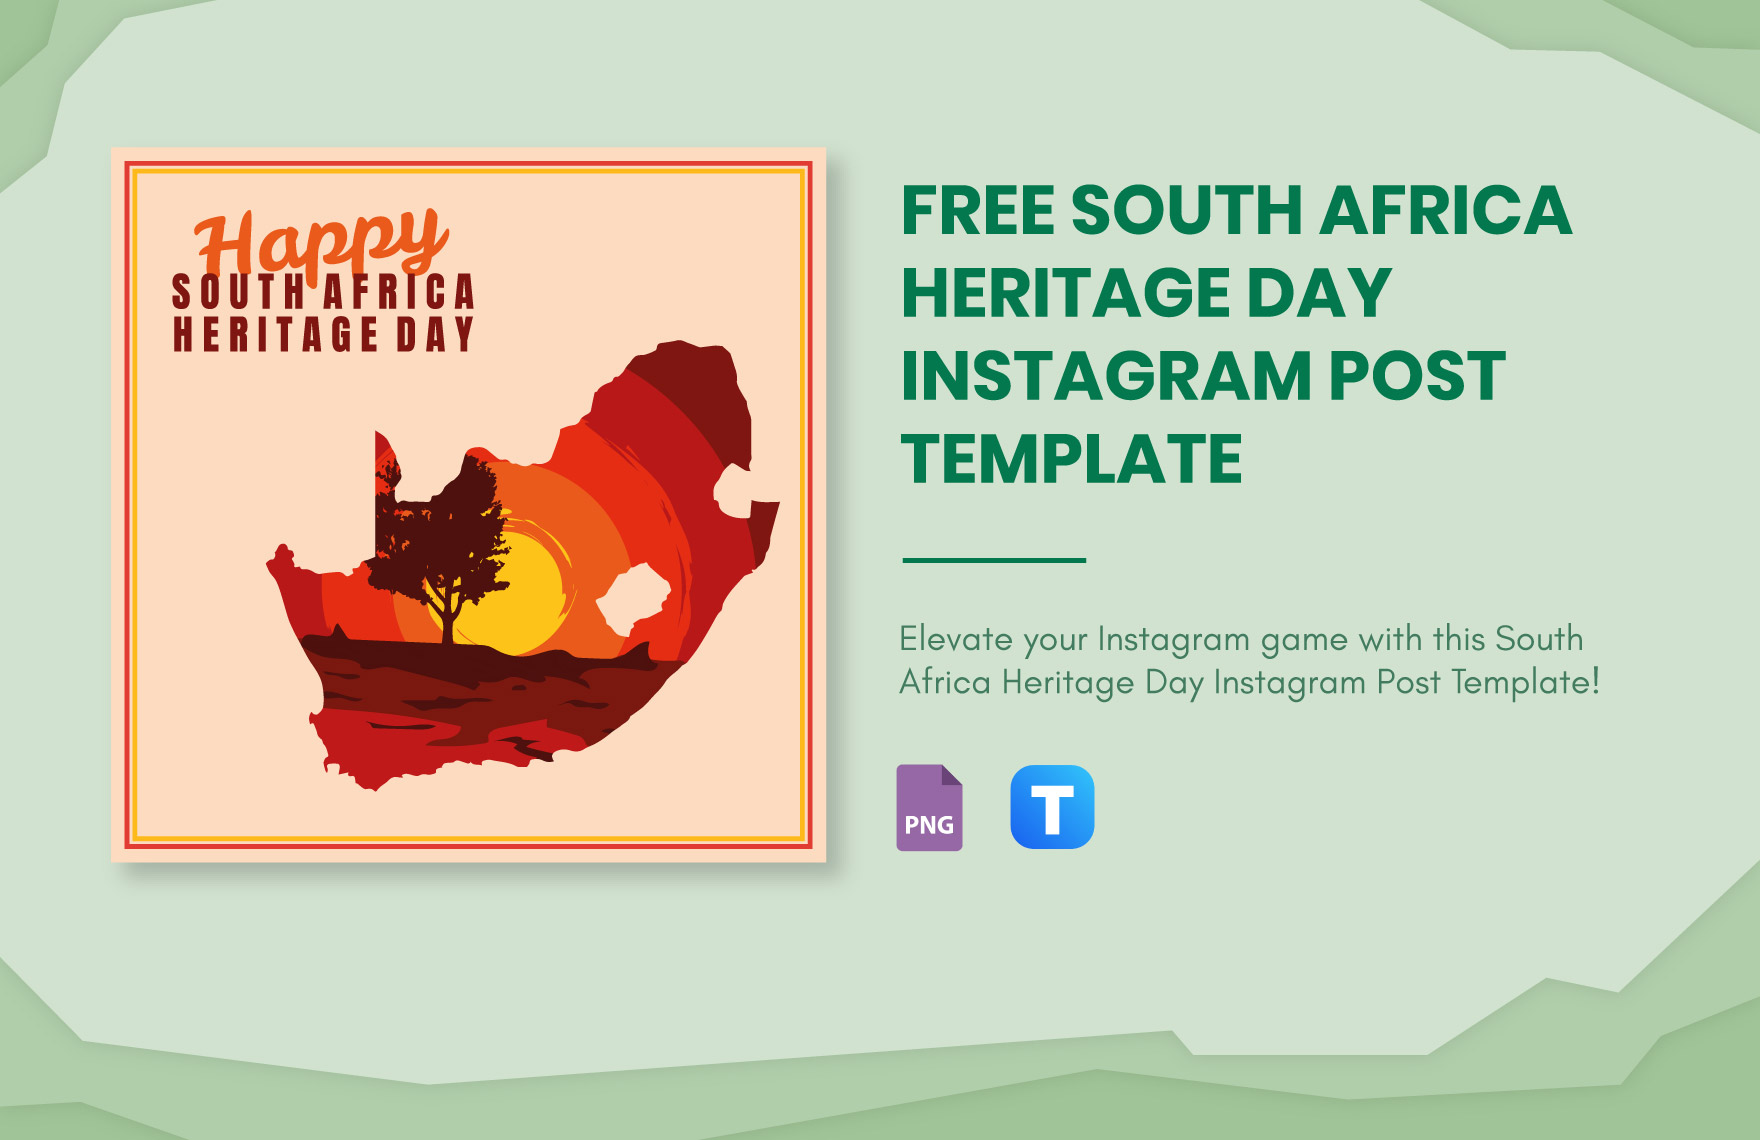 Free South Africa Heritage Day Instagram Post Template in PNG